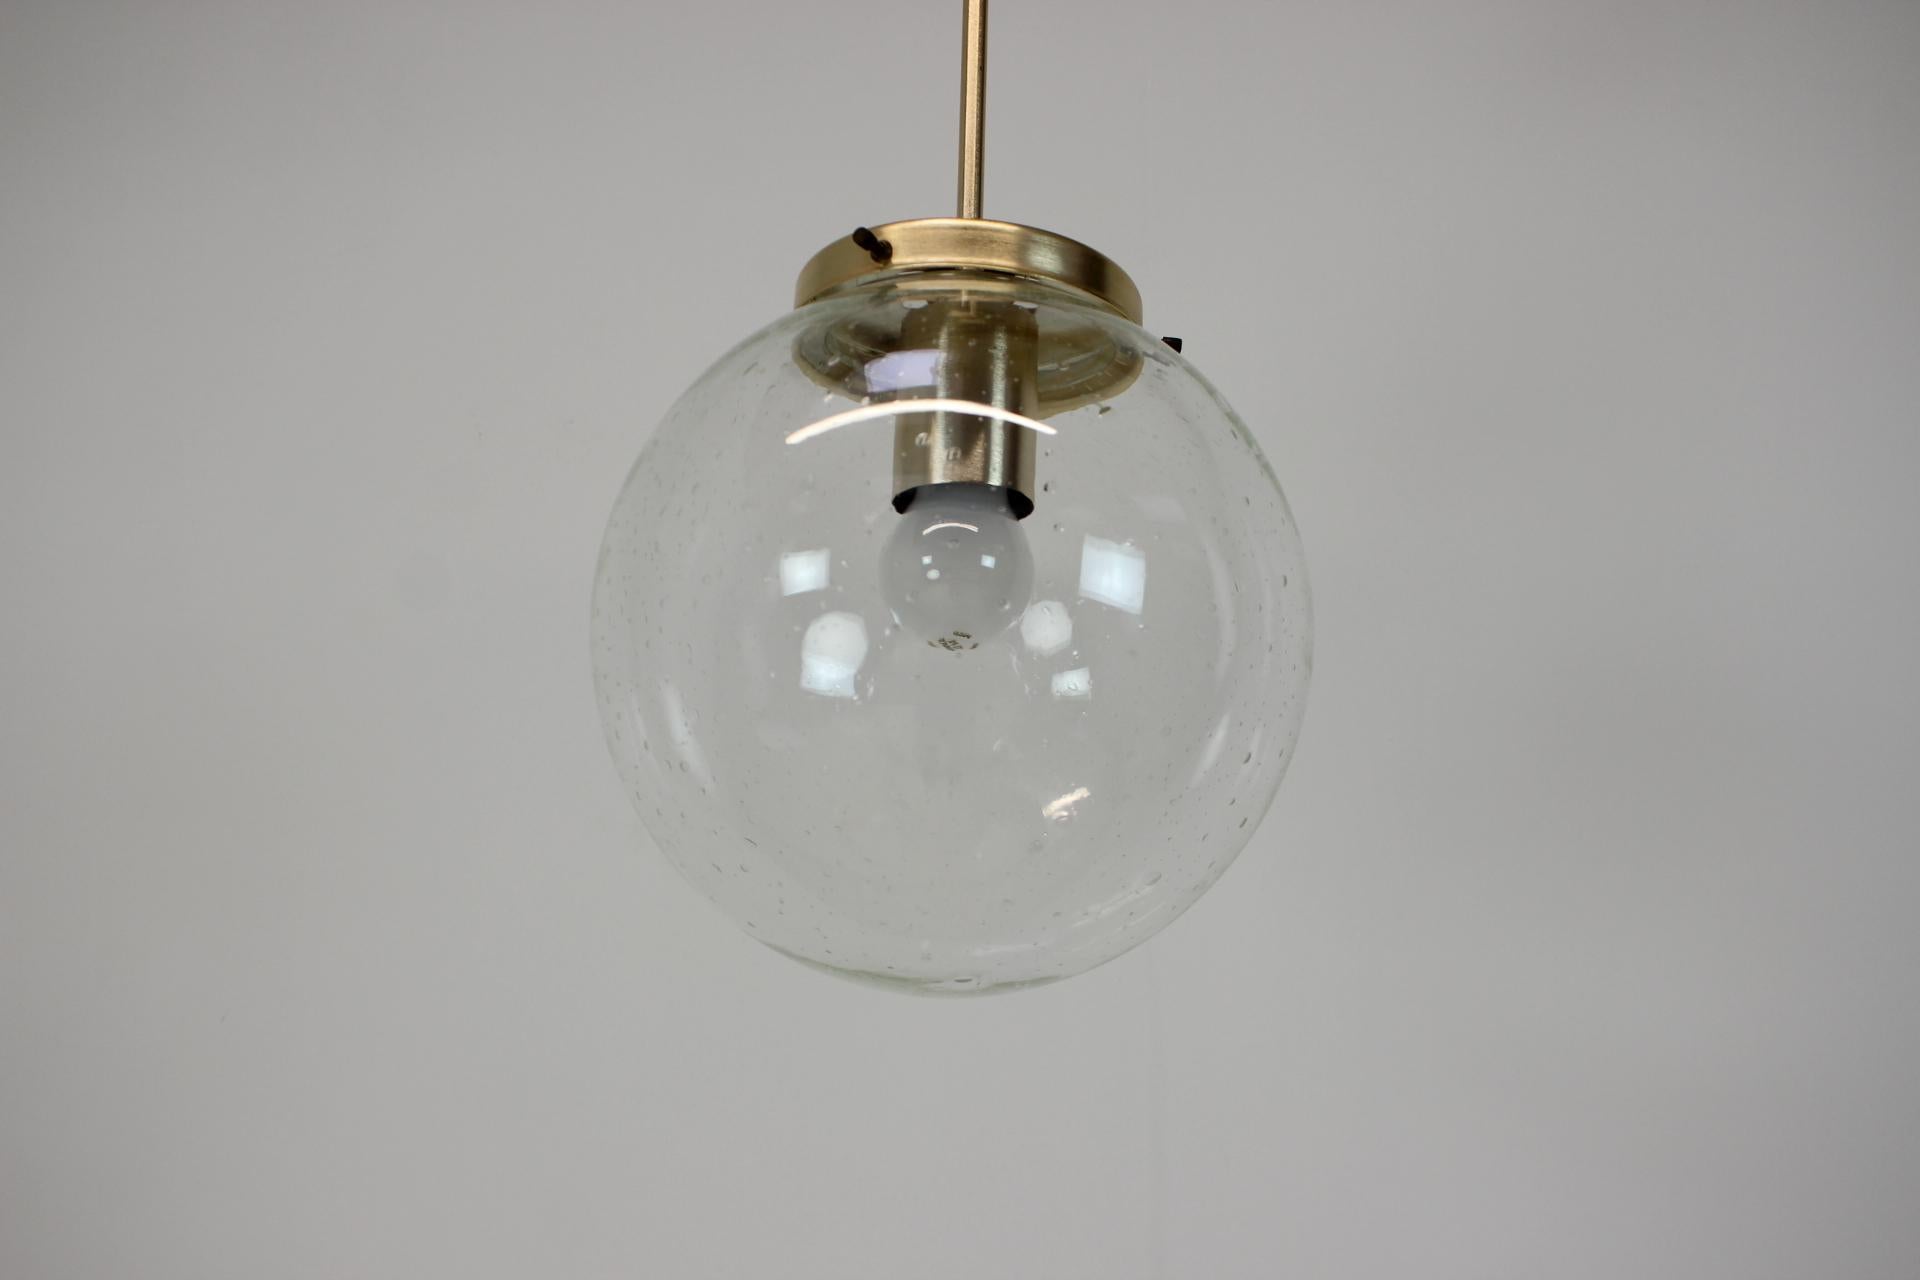 Made in Czechoslovakia
Made of glass, brass
1xE27 or E26 bulb
Good Original condition
US wiring compatible.